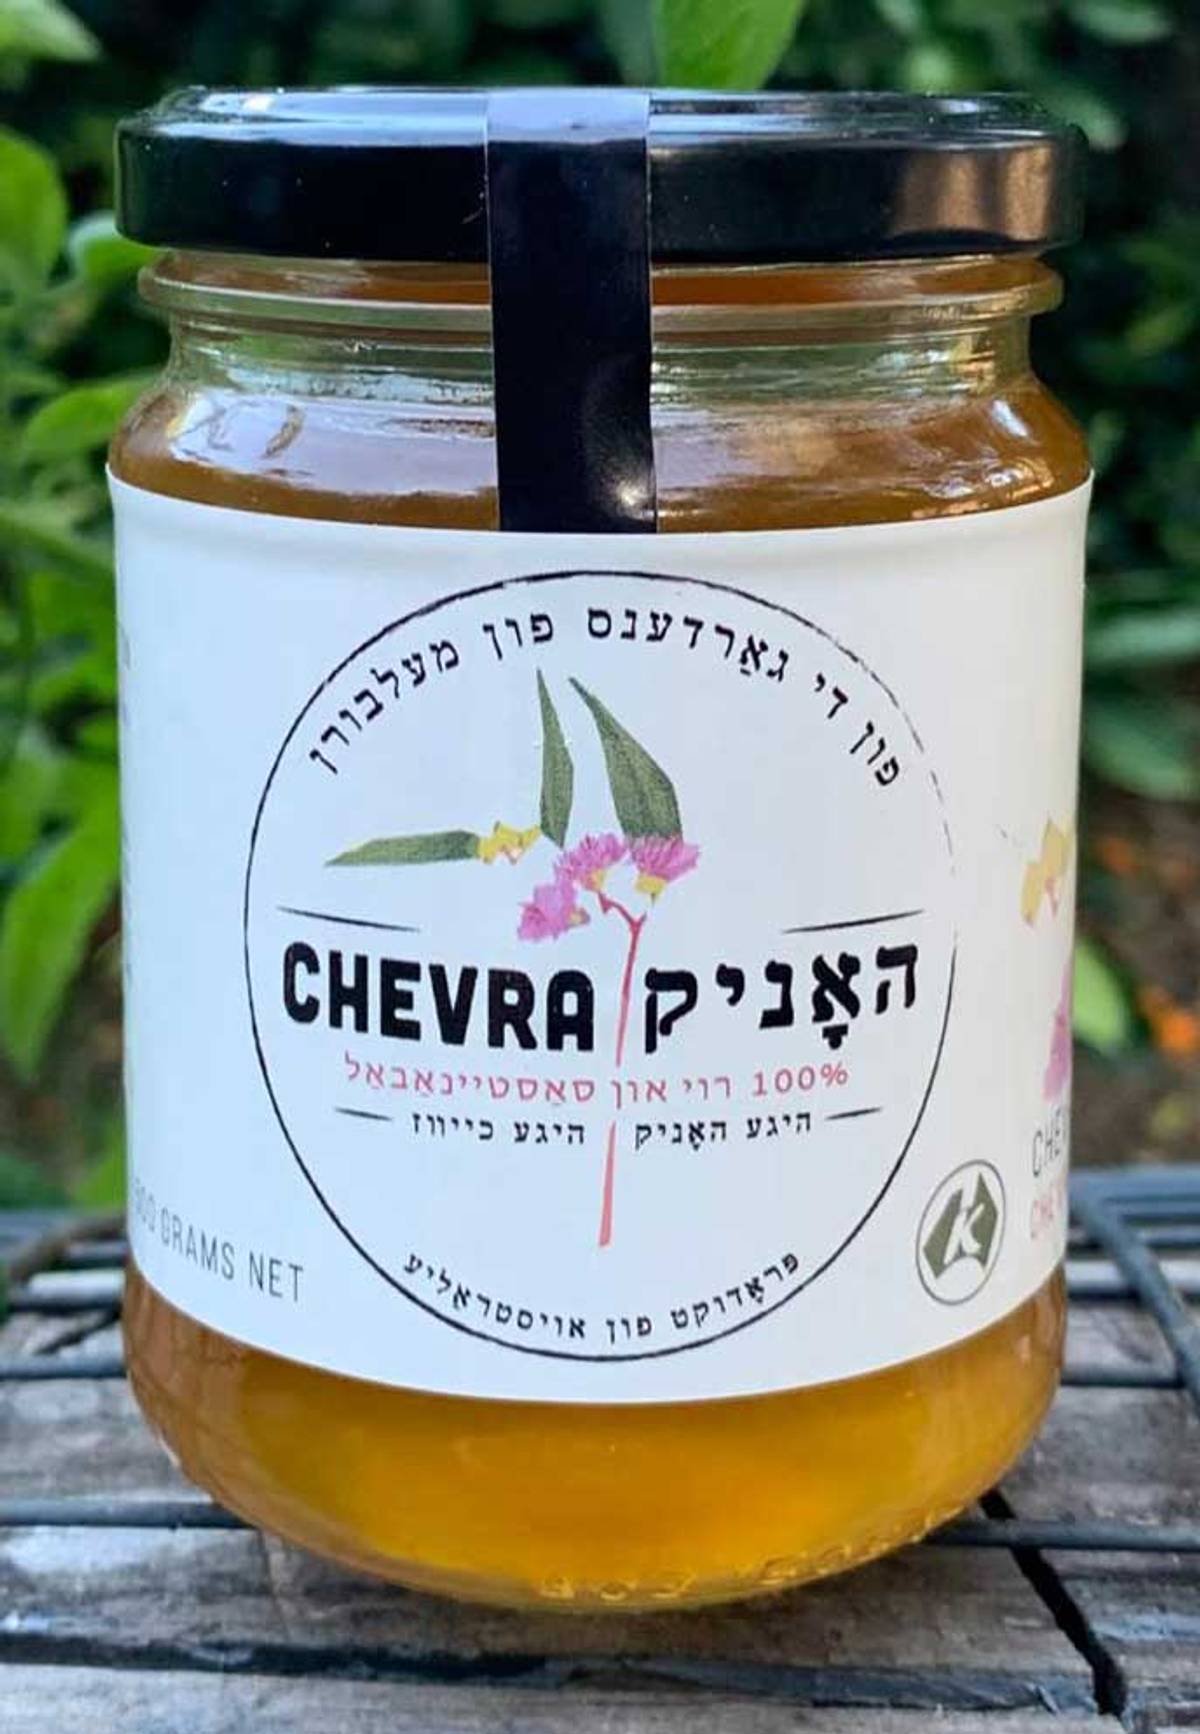 A jar of Chevra honey, harvested from around 40 hives around Melbourne